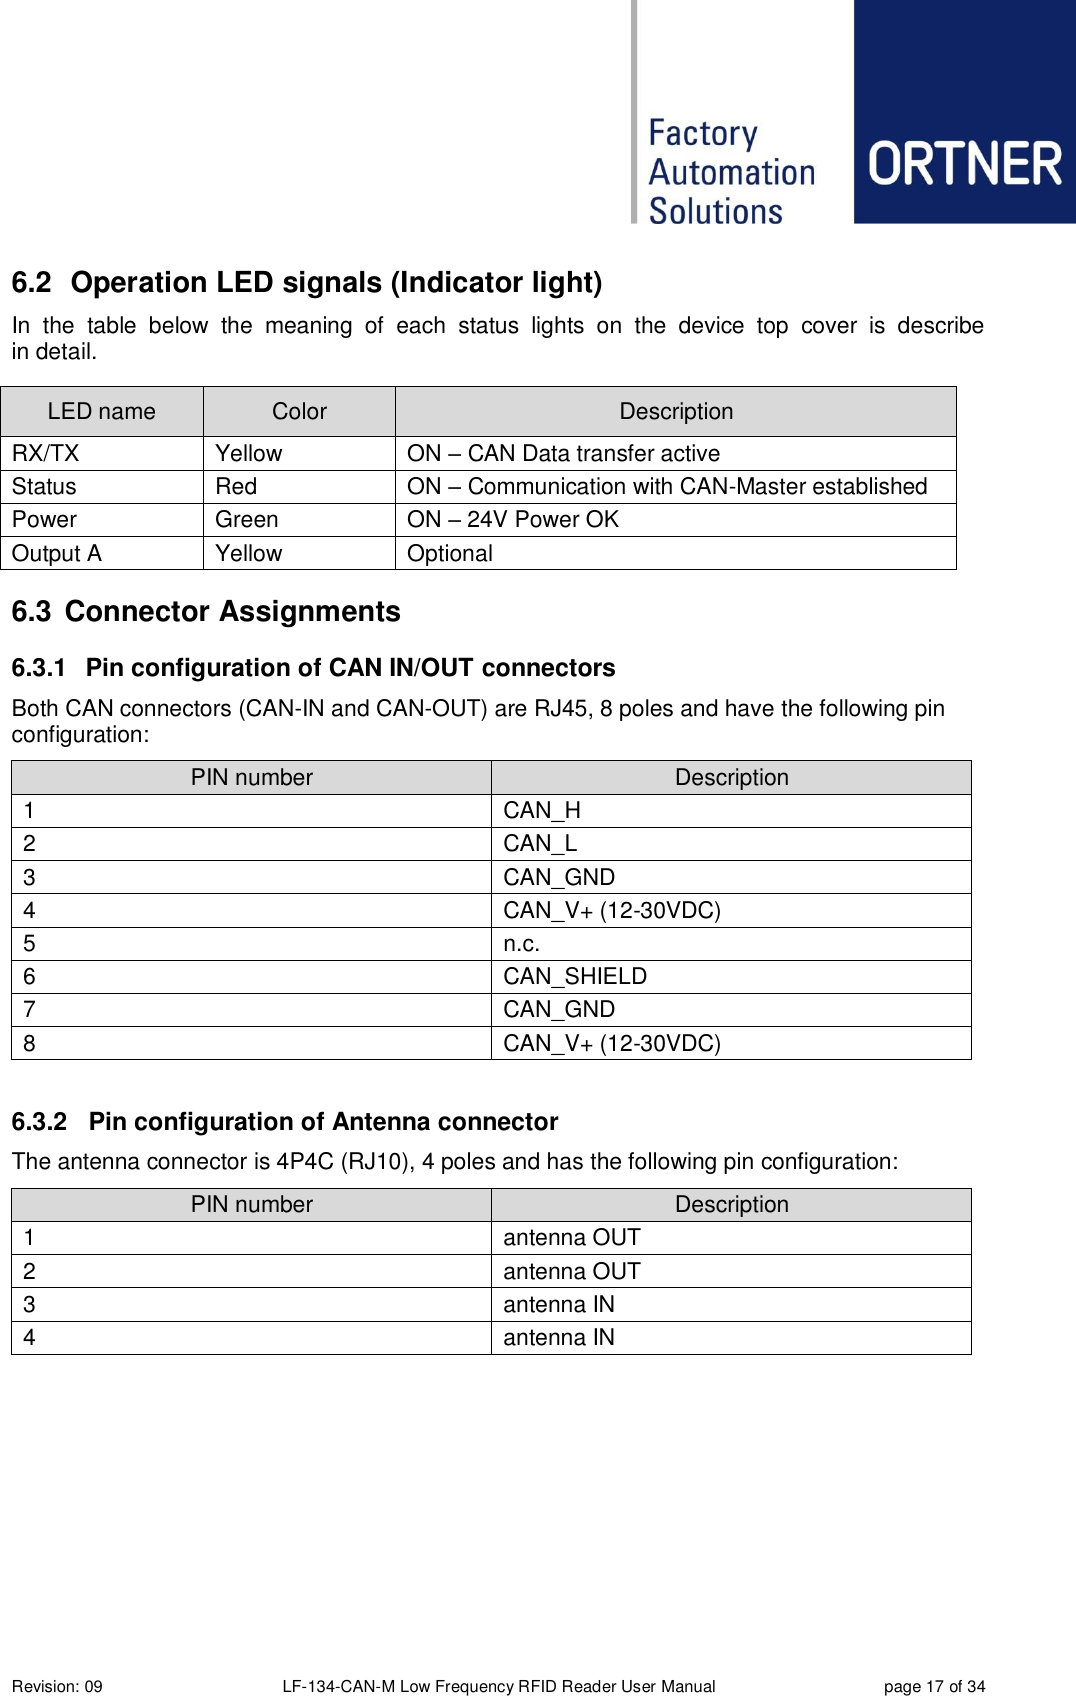  Revision: 09 LF-134-CAN-M Low Frequency RFID Reader User Manual  page 17 of 34 6.2  Operation LED signals (Indicator light) In  the  table  below  the  meaning  of  each  status  lights  on  the  device  top  cover  is  describe in detail. 6.3  Connector Assignments 6.3.1  Pin configuration of CAN IN/OUT connectors Both CAN connectors (CAN-IN and CAN-OUT) are RJ45, 8 poles and have the following pin configuration: PIN number Description 1 CAN_H 2 CAN_L 3 CAN_GND 4 CAN_V+ (12-30VDC) 5 n.c. 6 CAN_SHIELD 7 CAN_GND 8 CAN_V+ (12-30VDC)  6.3.2  Pin configuration of Antenna connector The antenna connector is 4P4C (RJ10), 4 poles and has the following pin configuration: PIN number Description 1 antenna OUT 2 antenna OUT 3 antenna IN 4 antenna IN    LED name Color Description RX/TX Yellow ON – CAN Data transfer active Status Red ON – Communication with CAN-Master established  Power Green ON – 24V Power OK Output A Yellow Optional 